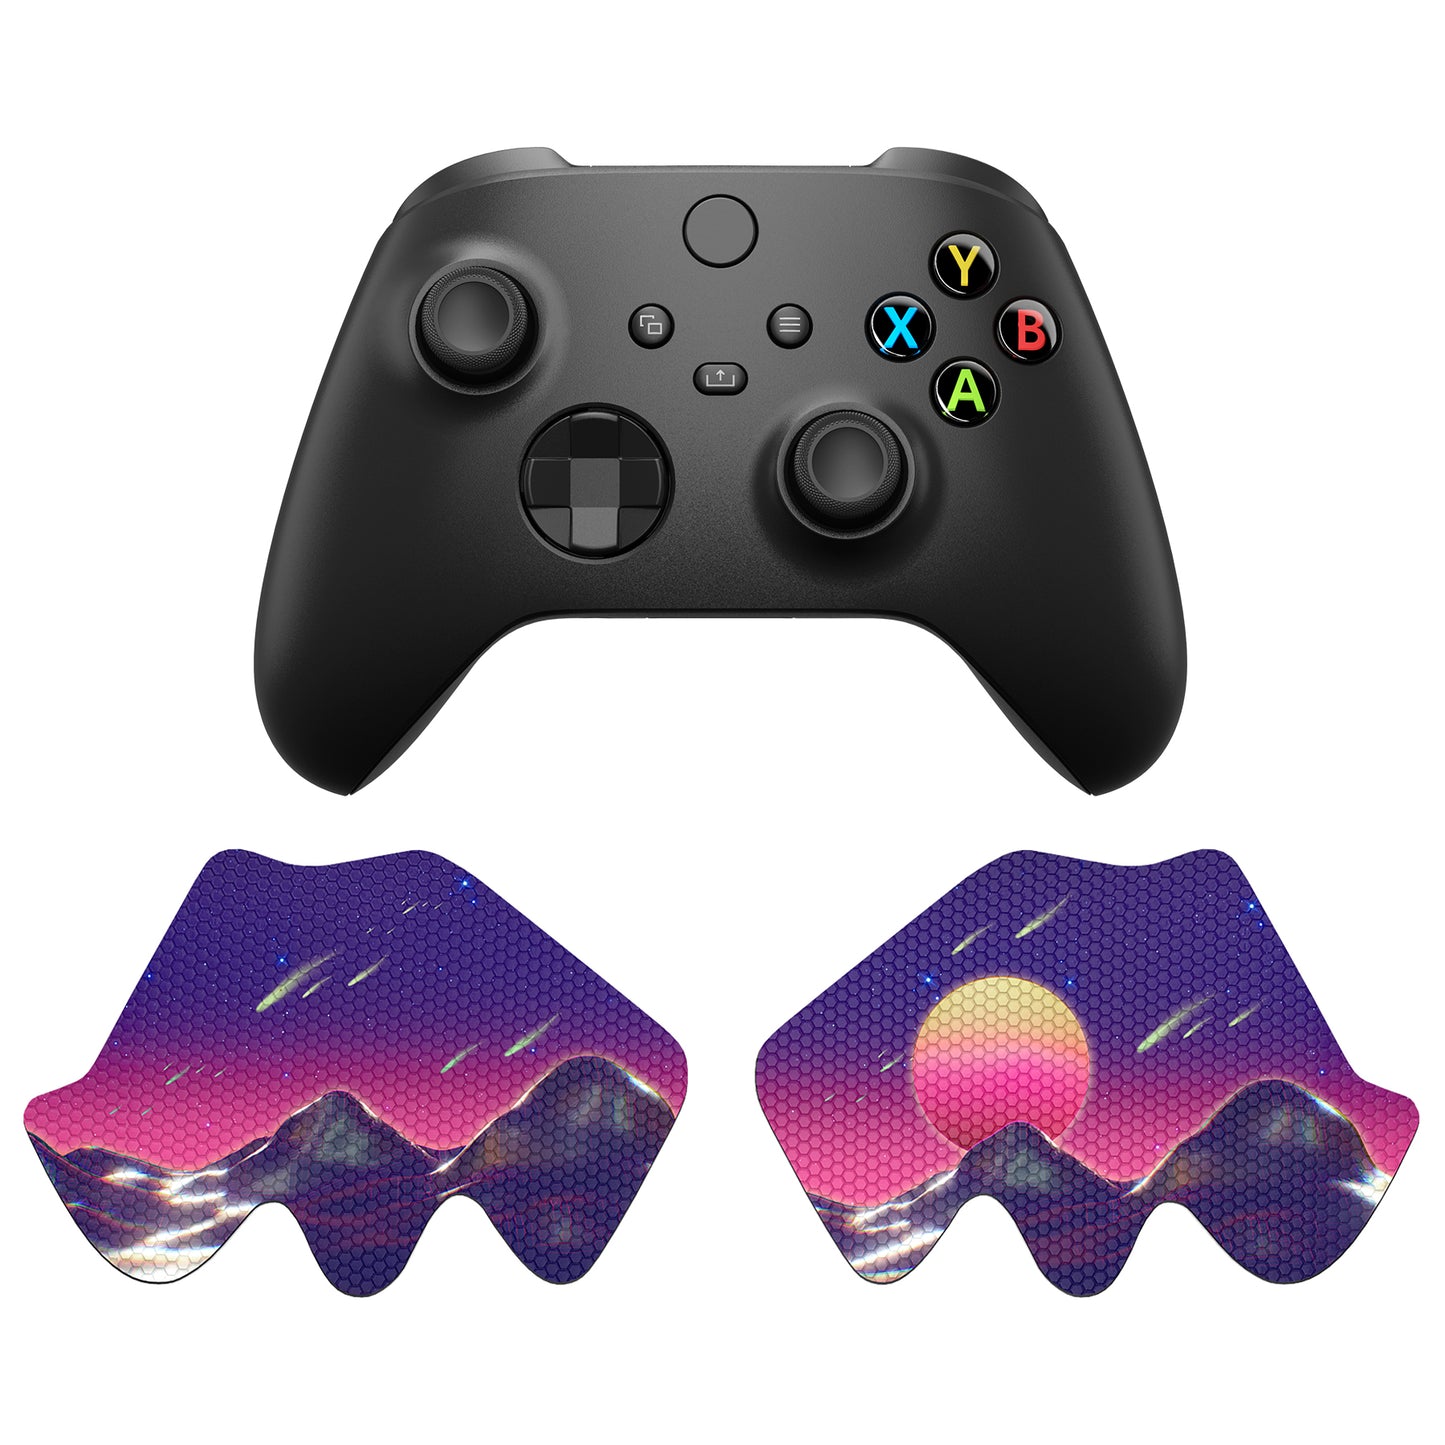 PlayVital Anti-Skid Sweat-Absorbent Controller Grip for Xbox Series X/S Controller, Professional Textured Soft Rubber Pads Handle Grips for Xbox Core Wireless Controller - The Cyber Moon - X3PJ035 PlayVital